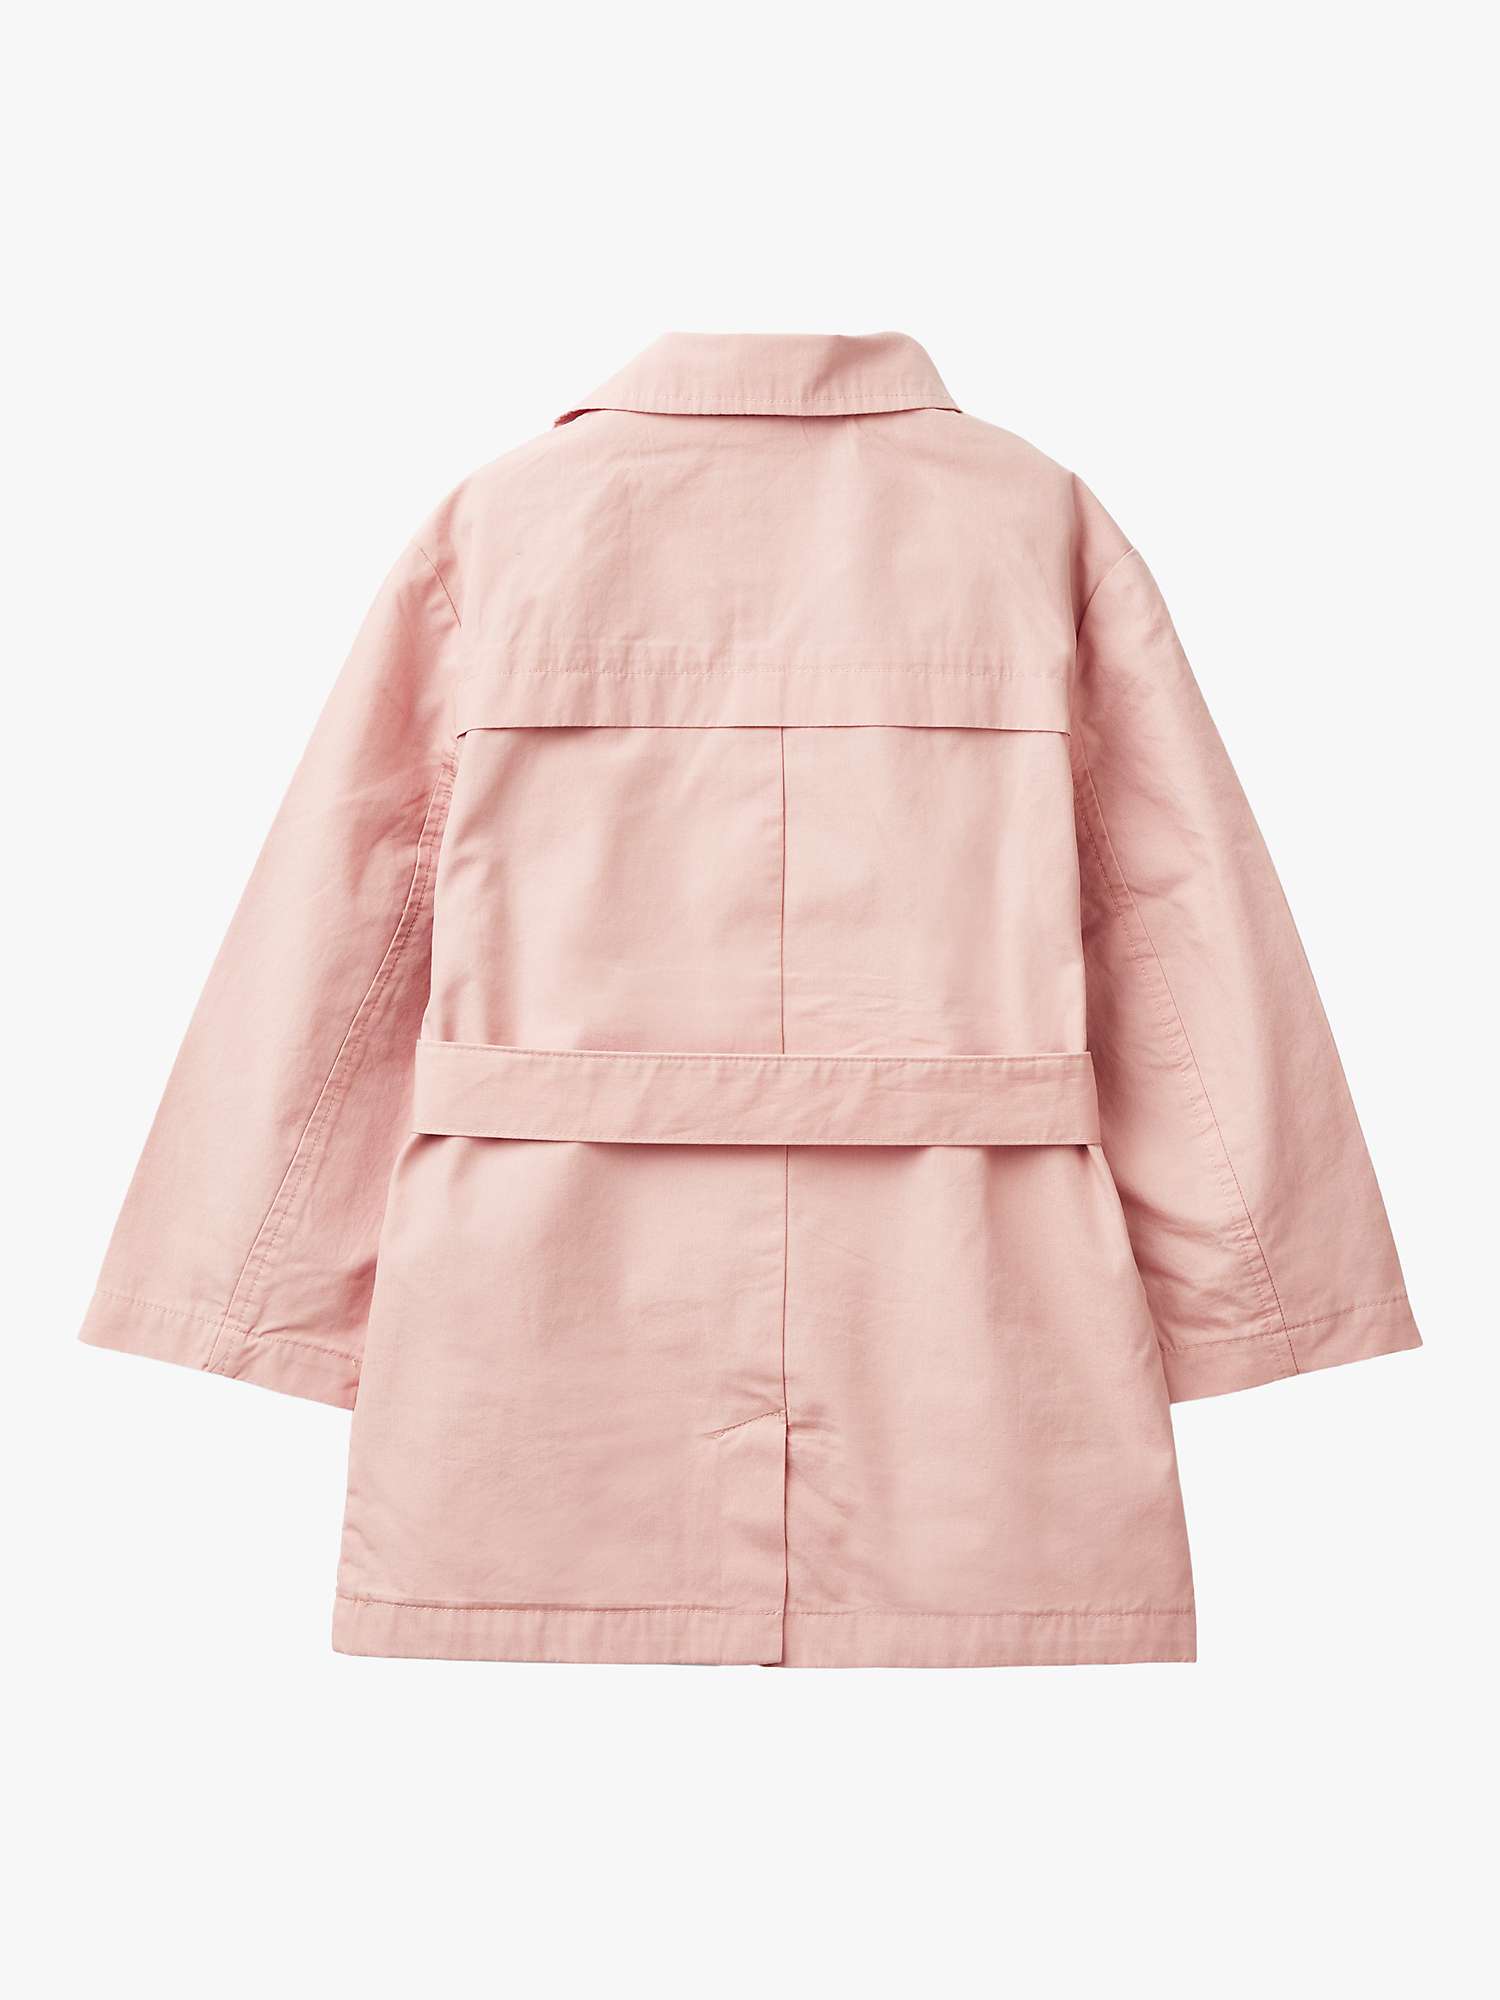 Buy Benetton Kids' Double Breasted Trench Coat, Dark Powder Online at johnlewis.com